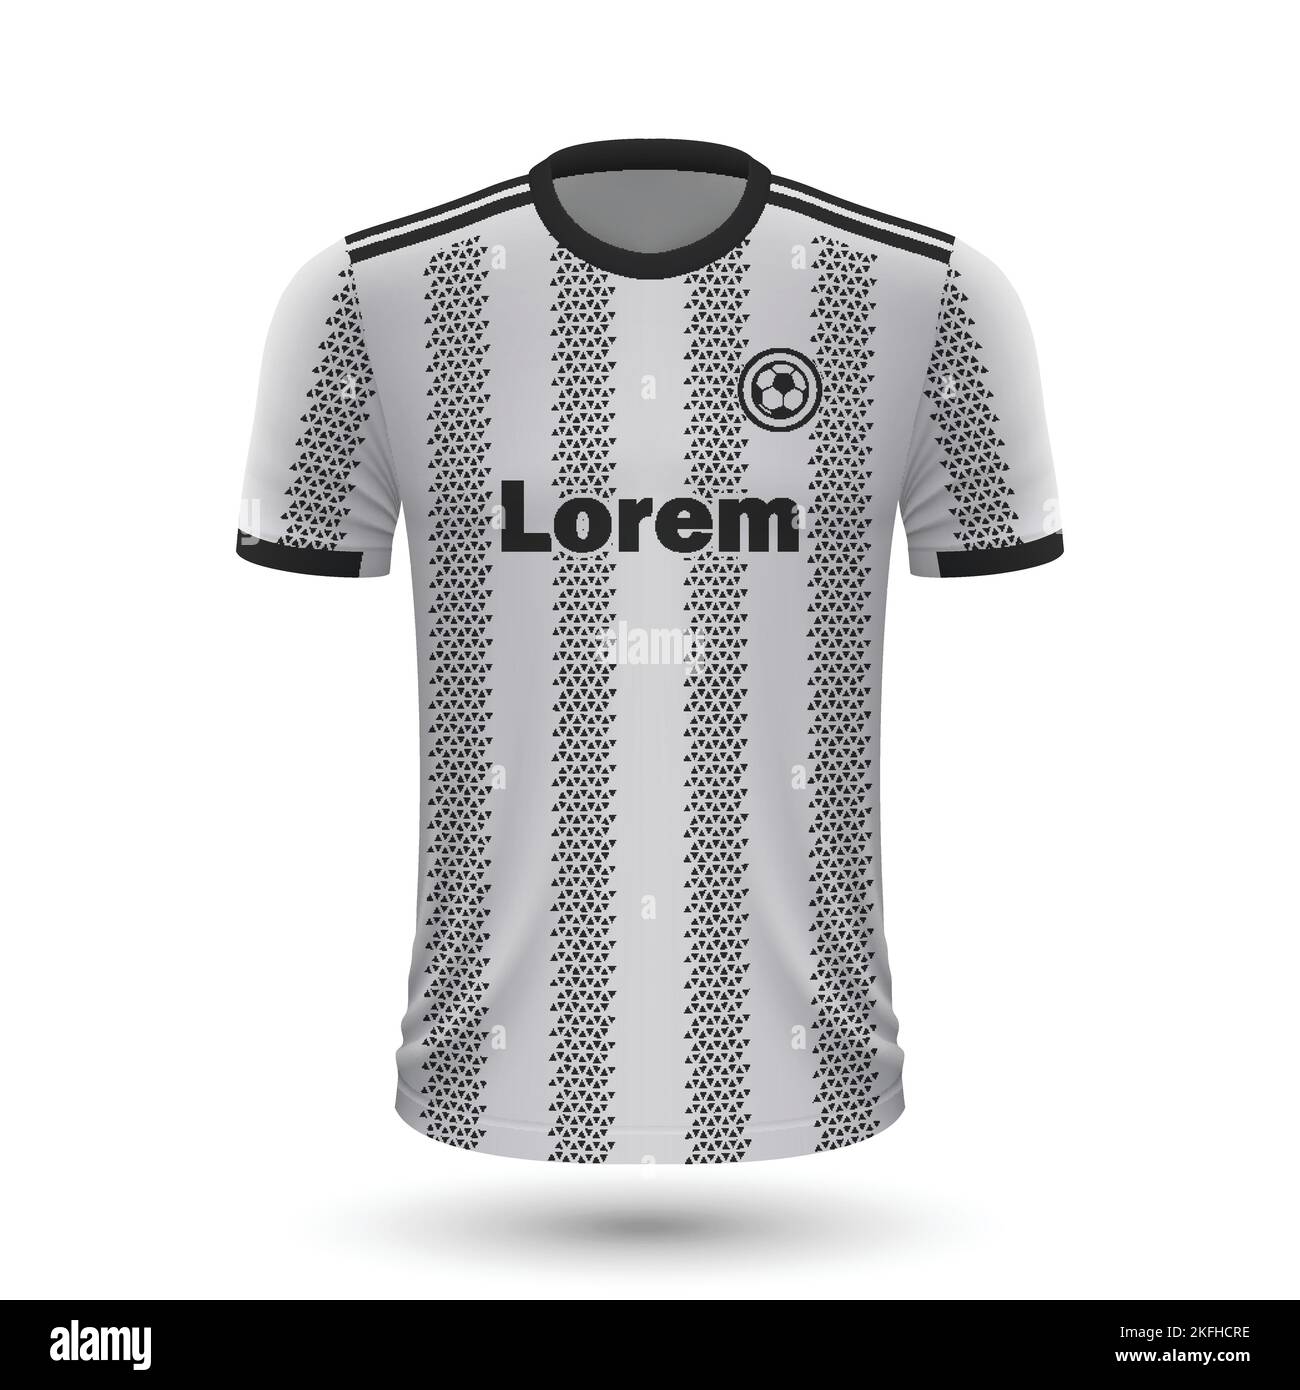 Realistic soccer shirt Juventus, jersey template for football kit 2022 Stock Vector